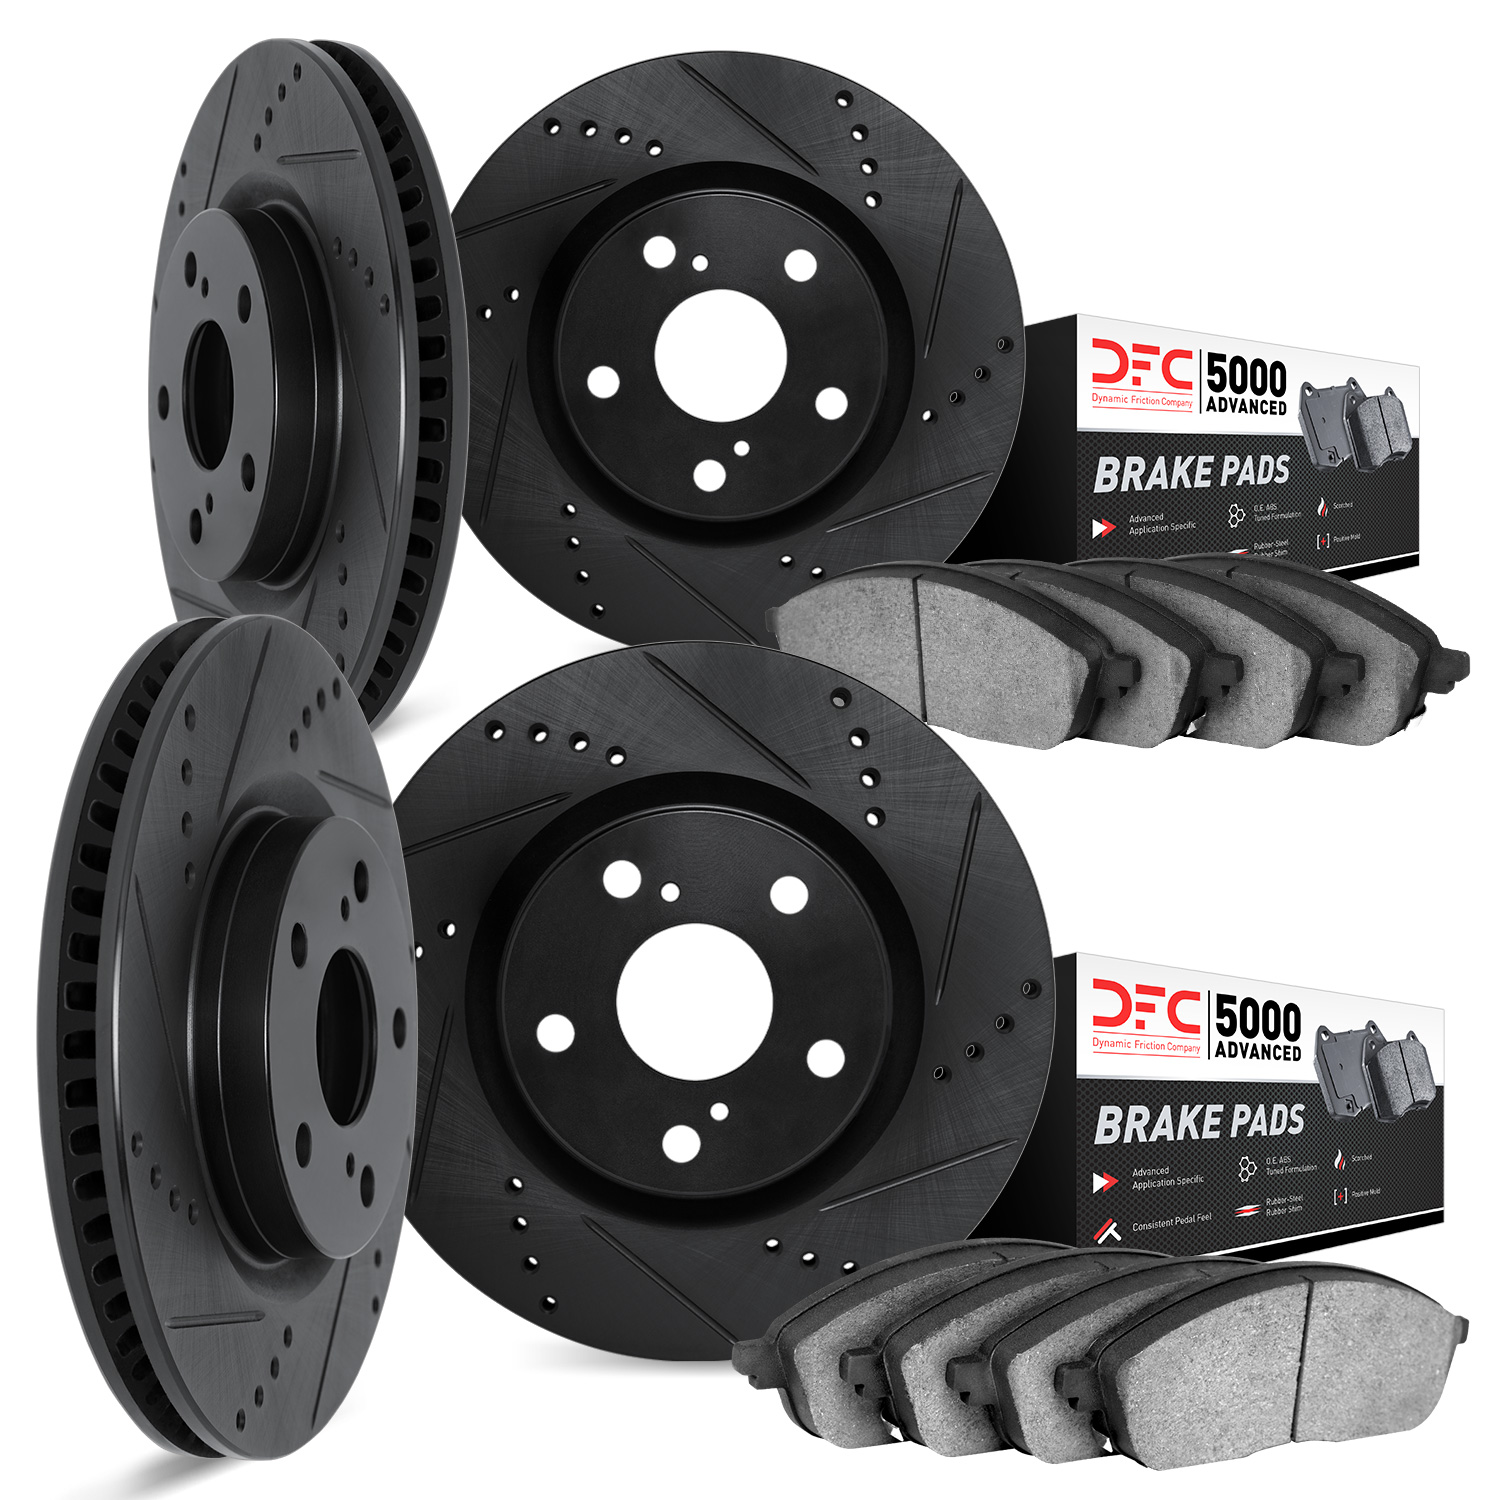 8504-47244 Drilled/Slotted Brake Rotors w/5000 Advanced Brake Pads Kit [Black], 1984-1987 GM, Position: Front and Rear